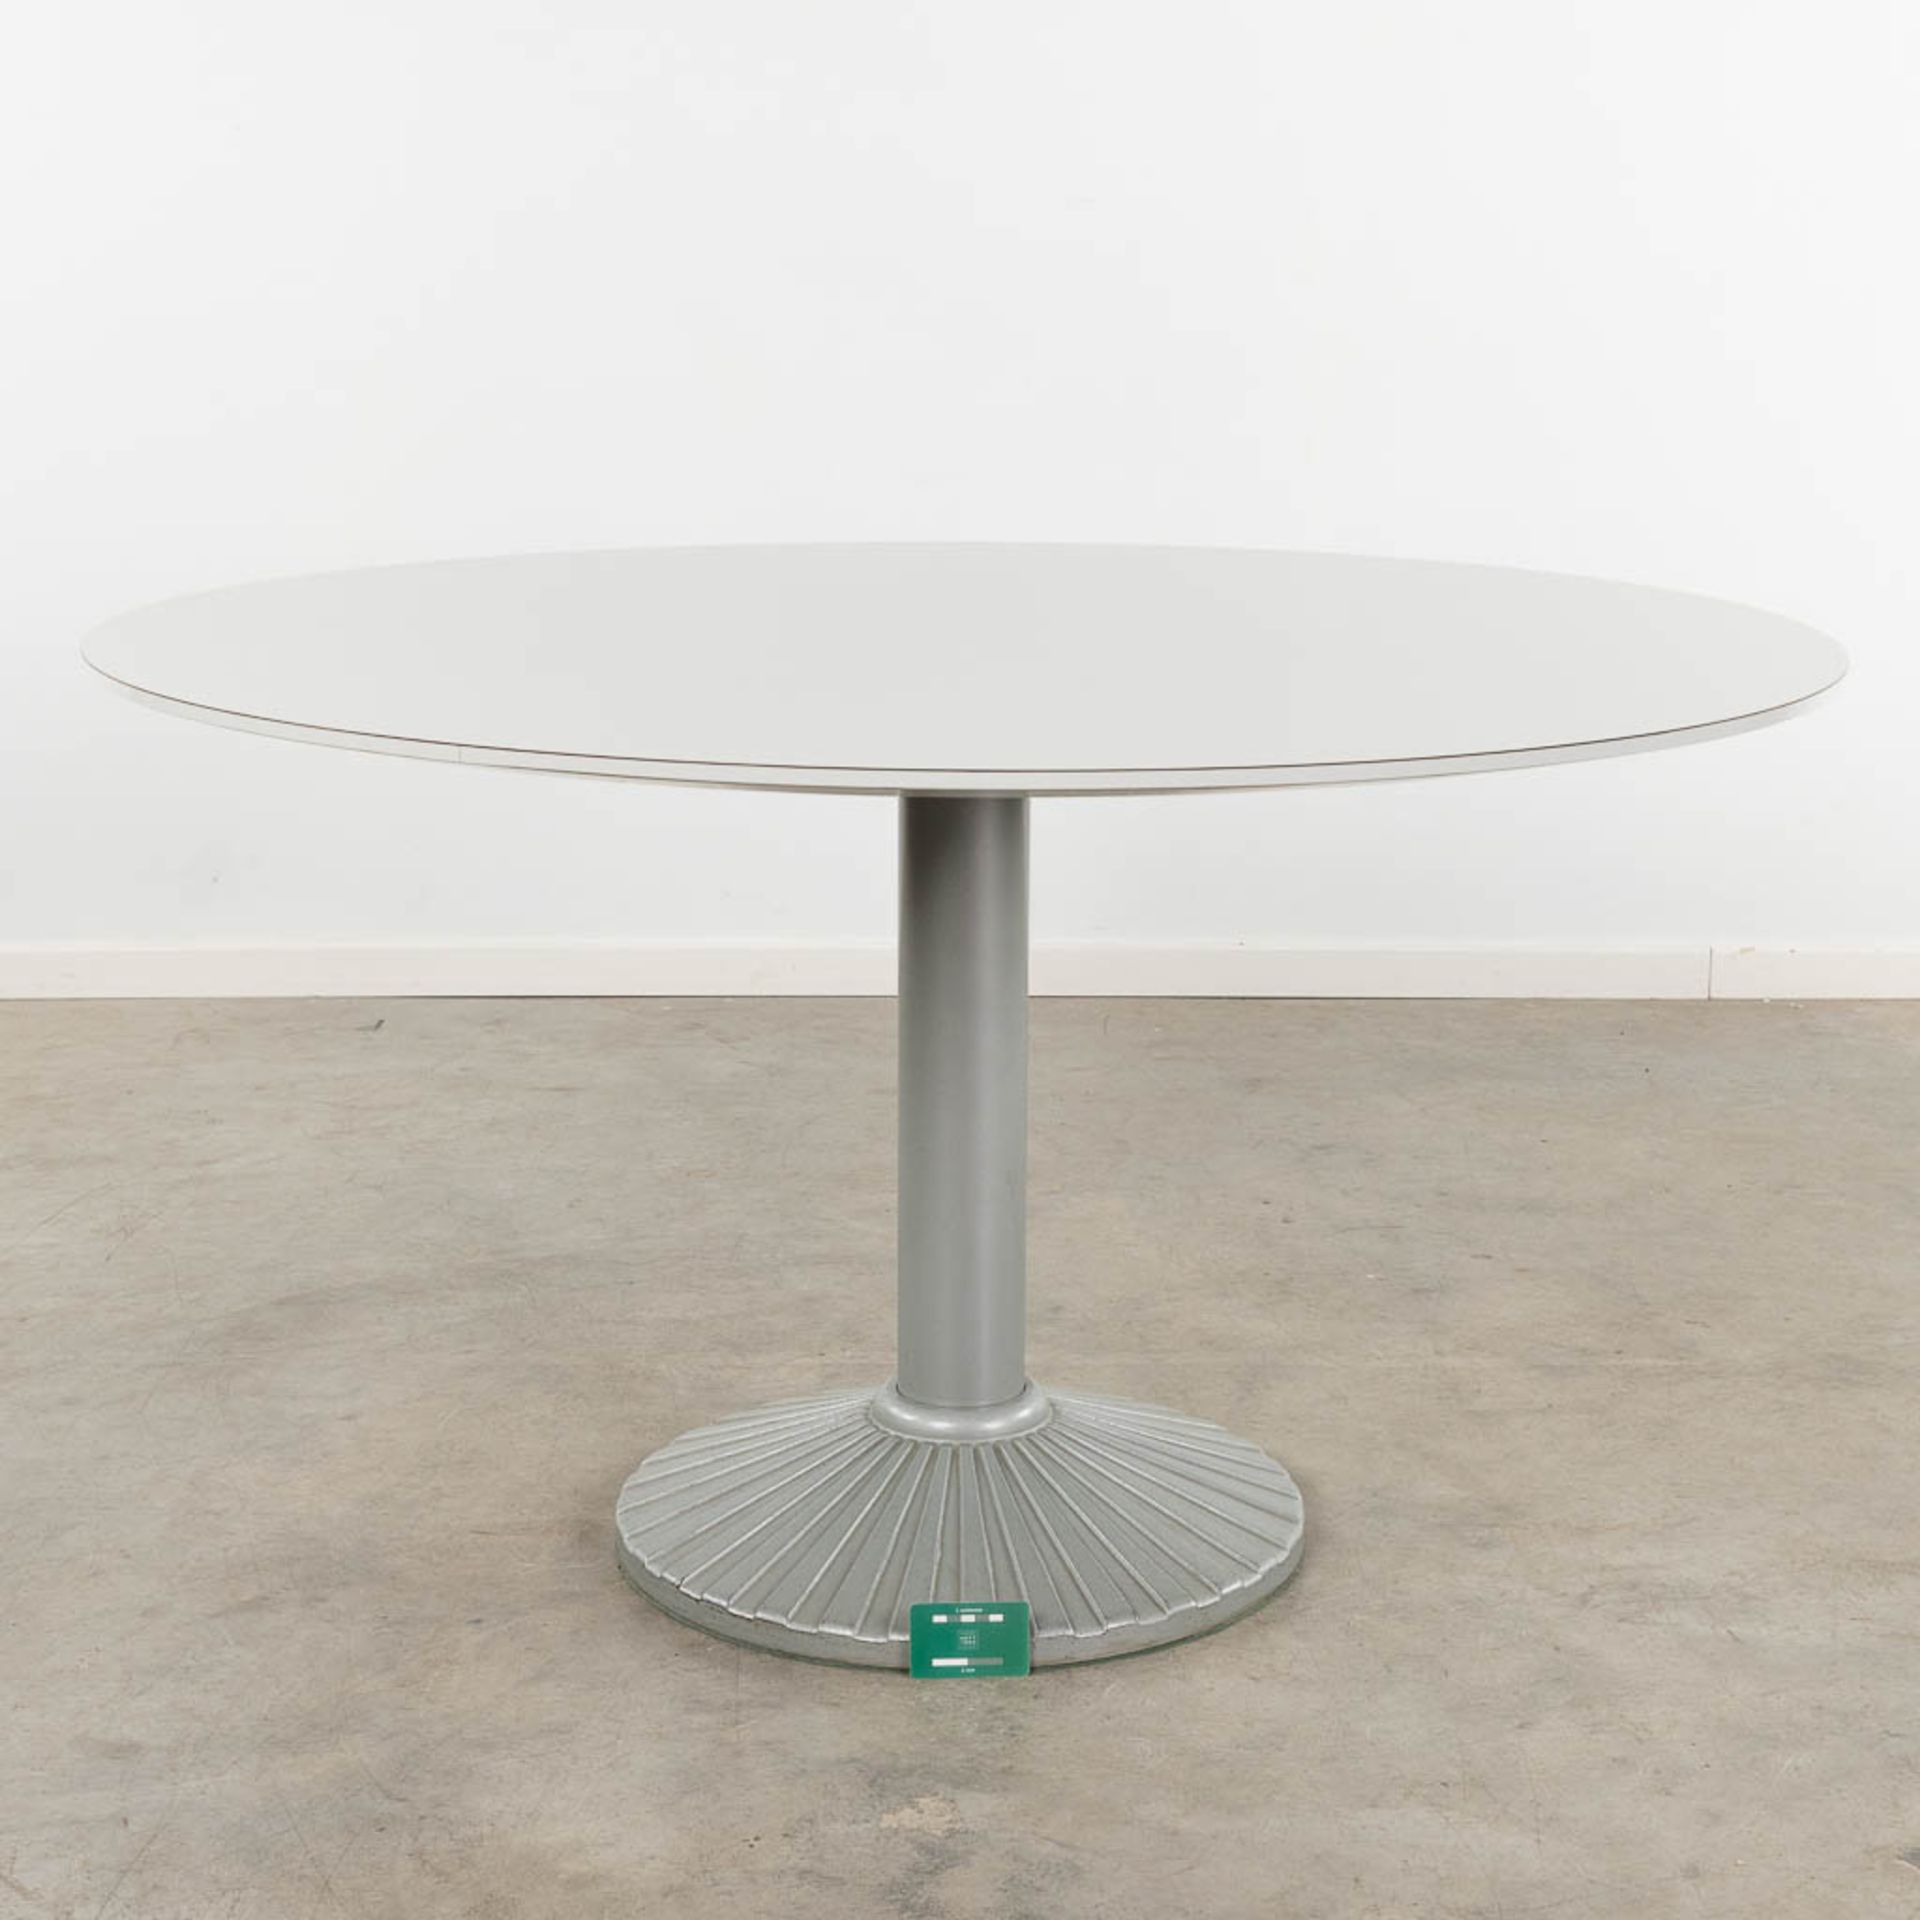 Peter NOEVER (XX-XXI) 'Round Table' for Zanotta. (H:73 x D:128 cm) - Image 2 of 9